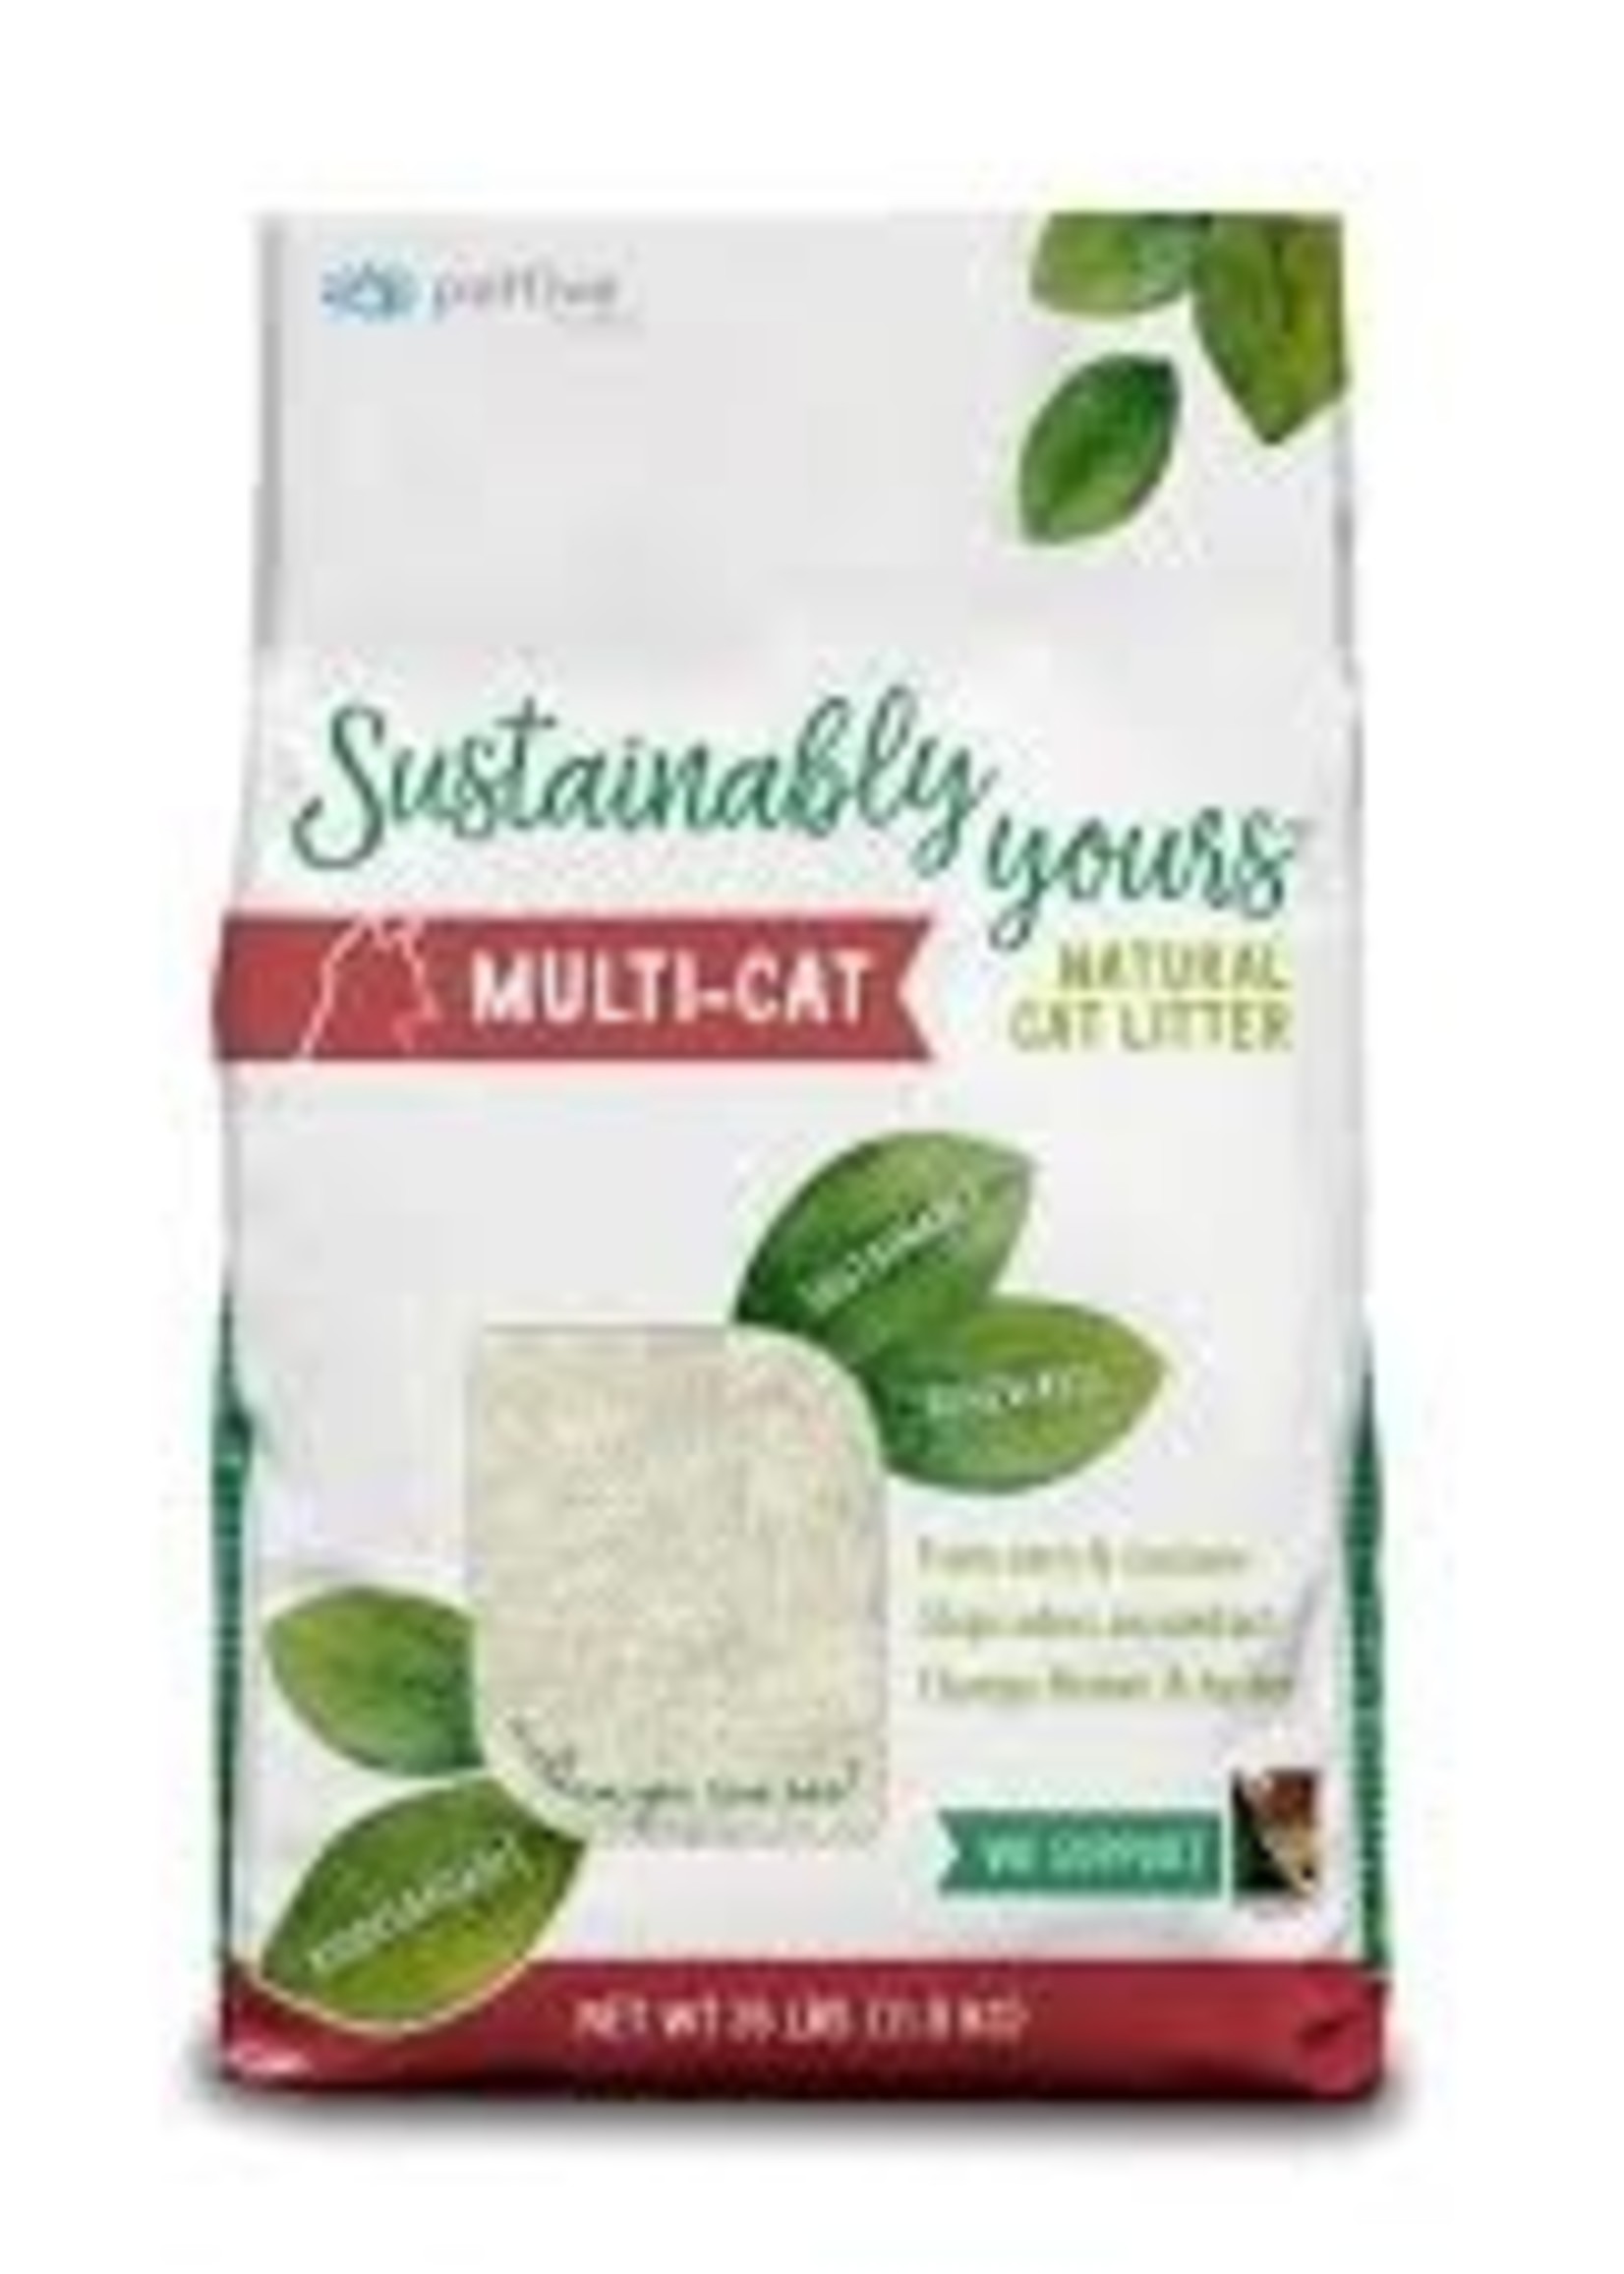 Pet Five Sustainably Yours Multi-Cat Litter 26lbs